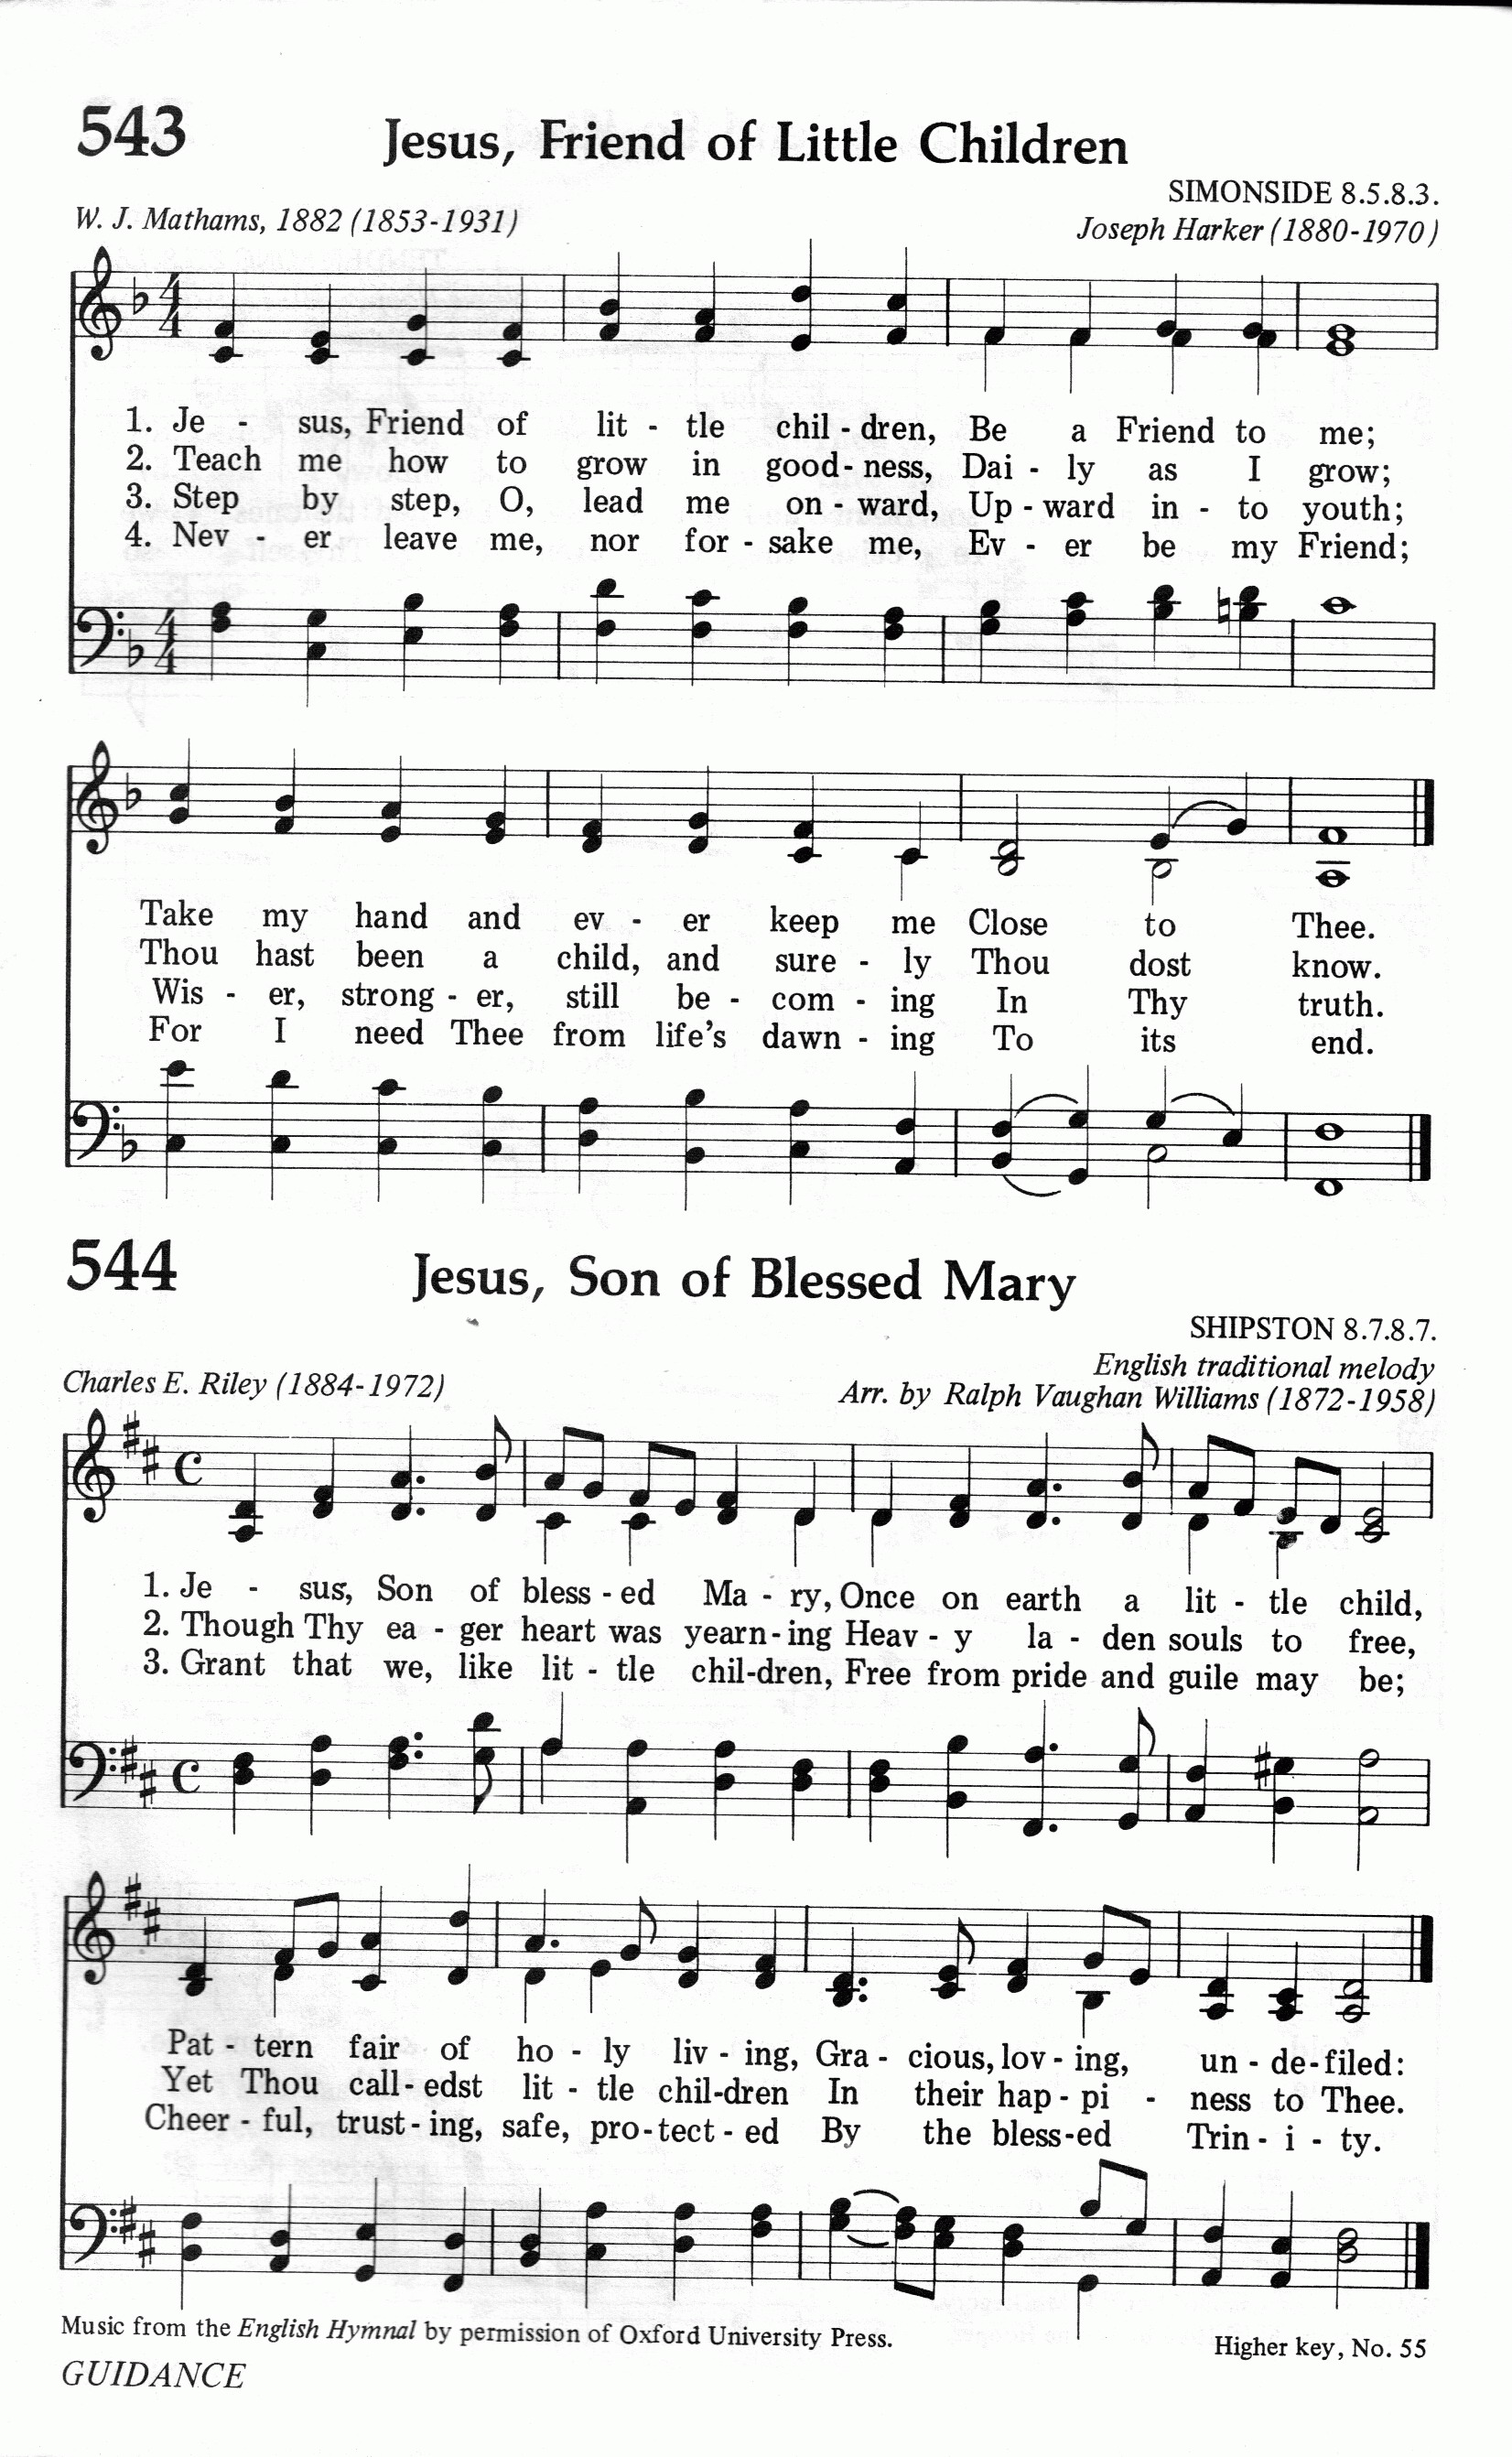 544.Jesus, Son of Blessed Mary-695HYMN